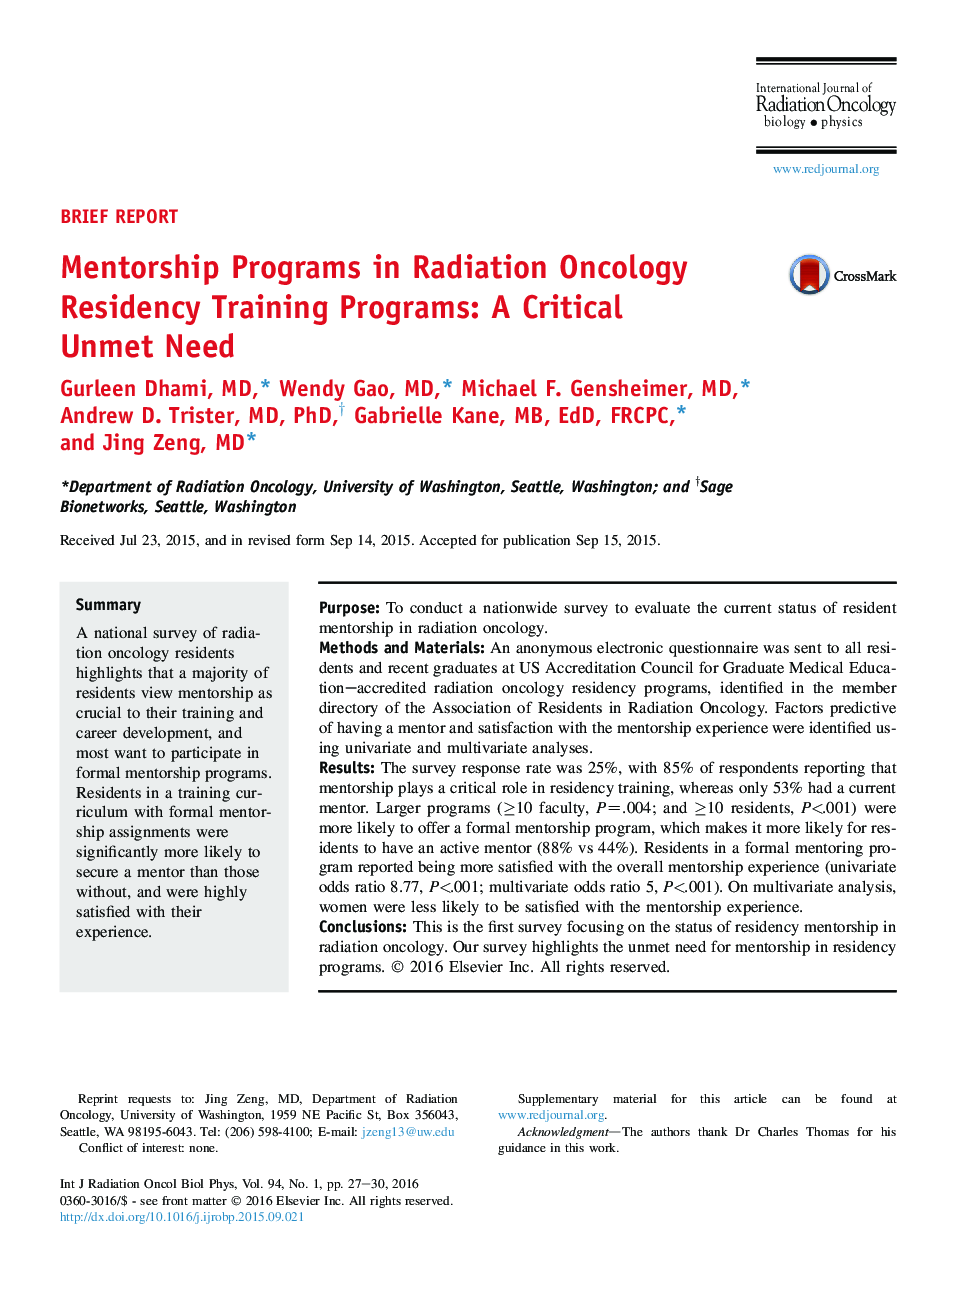 Mentorship Programs in Radiation Oncology Residency Training Programs: A Critical Unmet Need